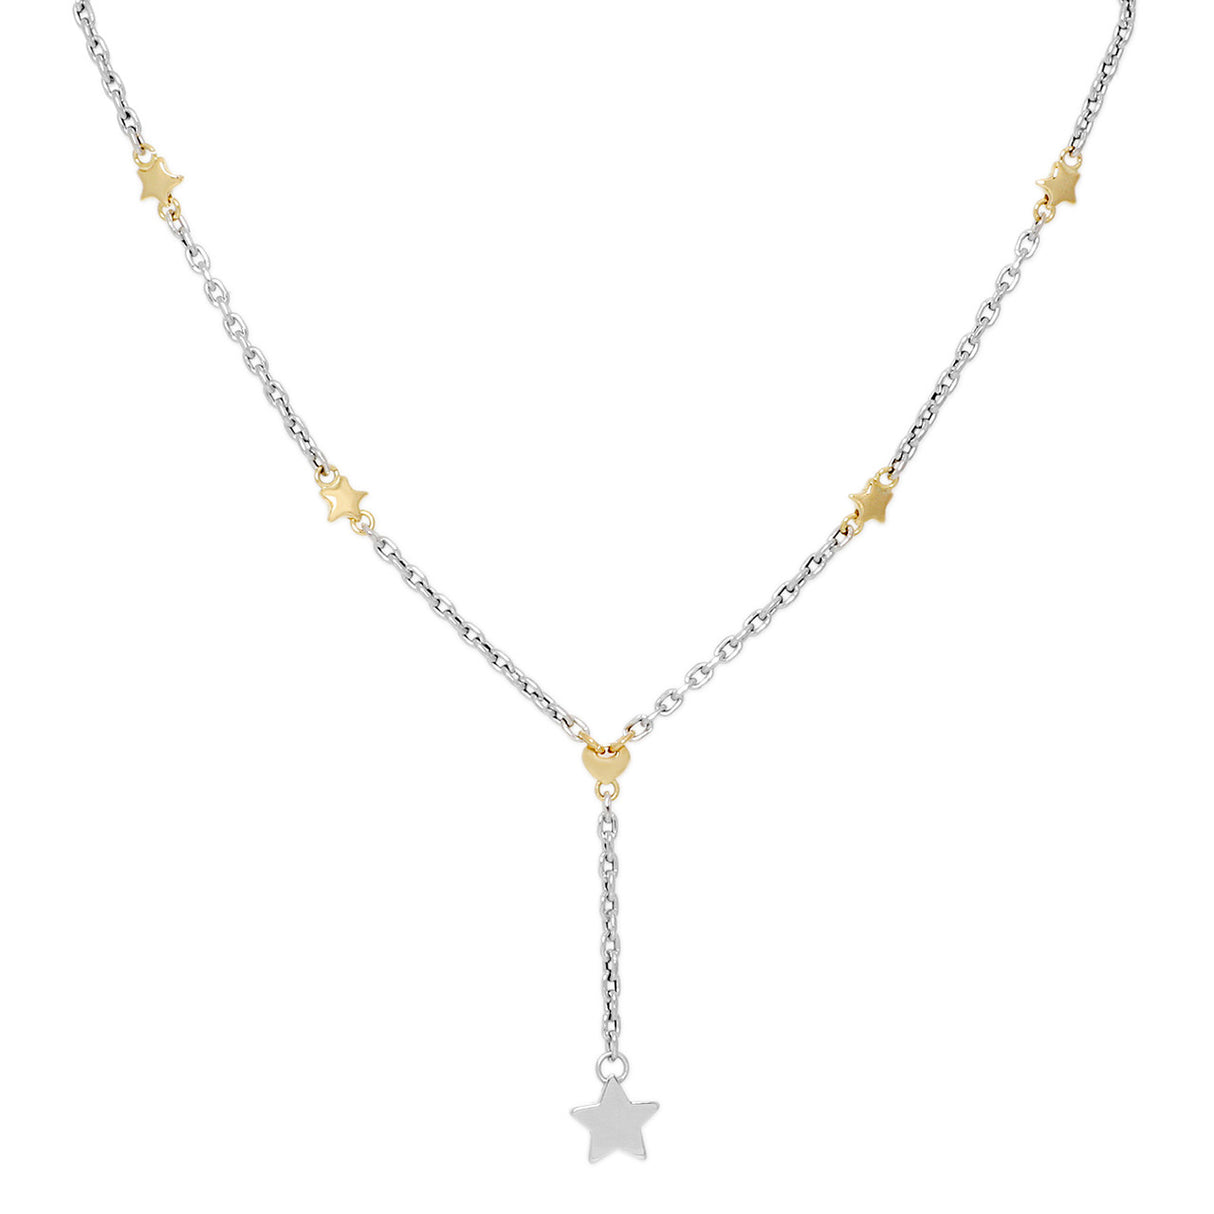 18K White & Yellow Gold Star Necklace